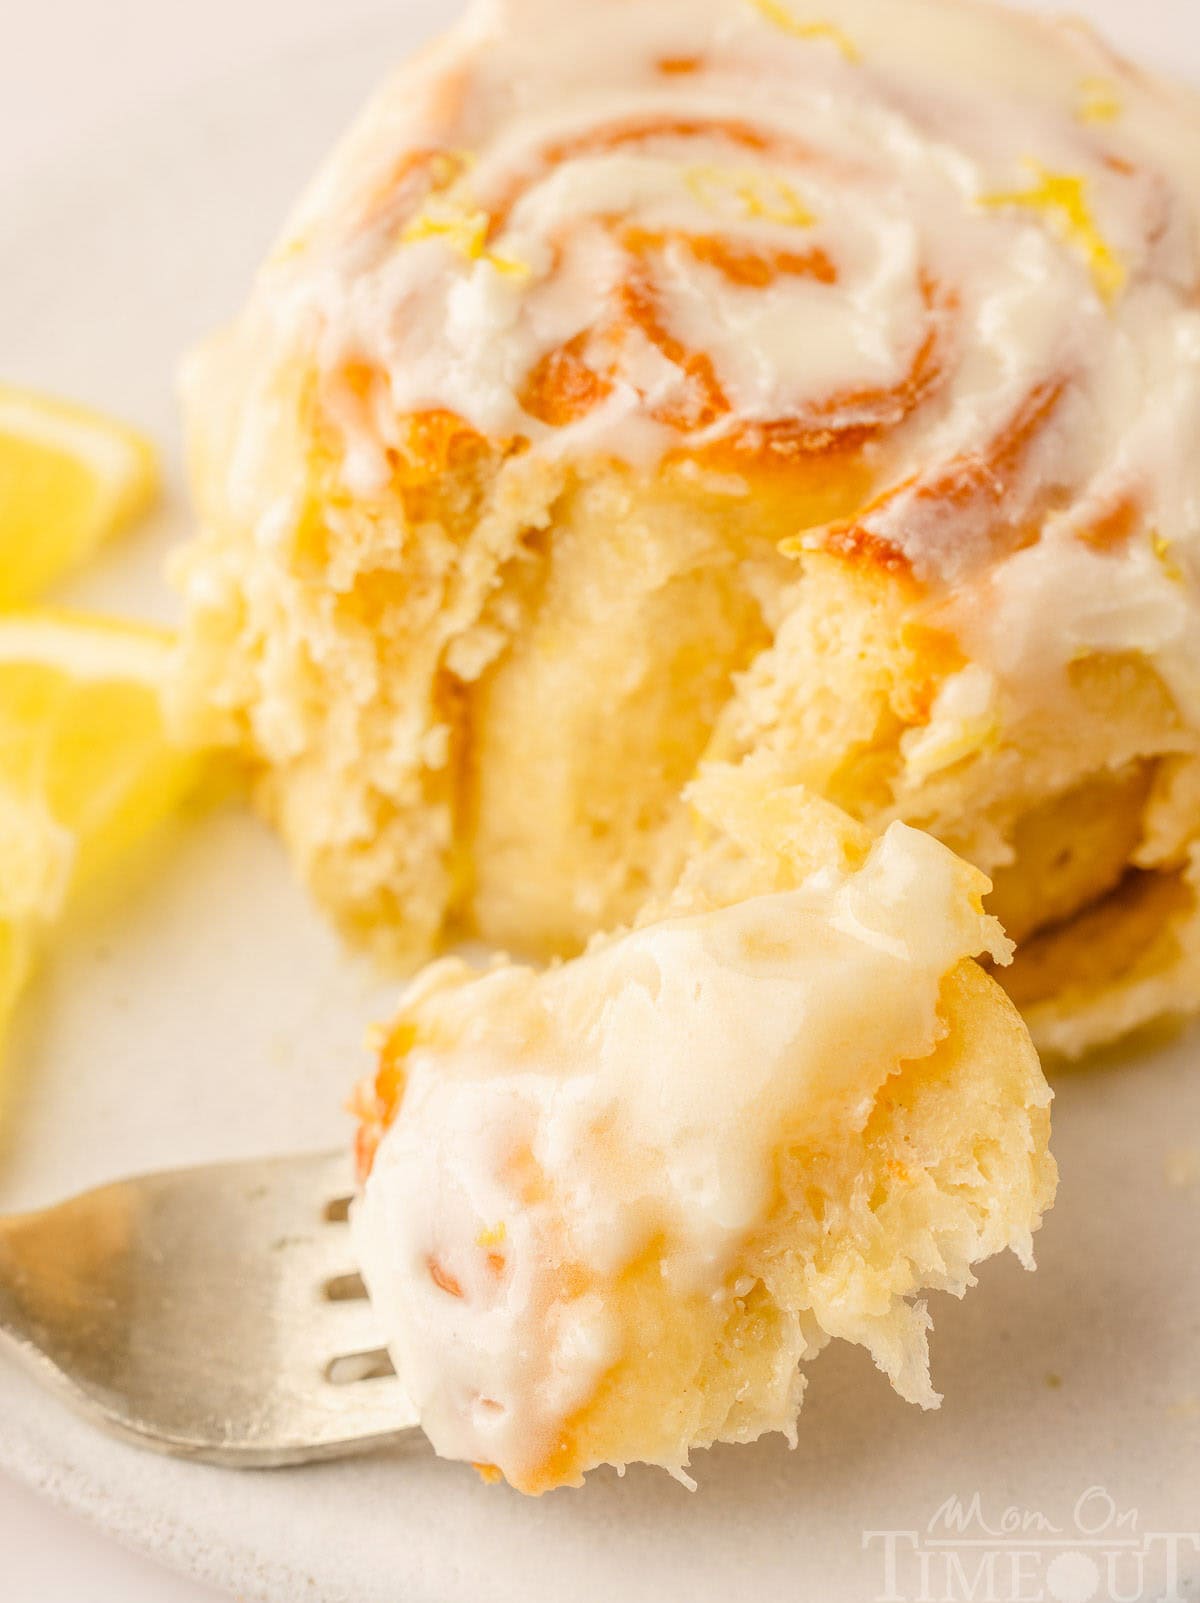 A lemon roll with a fork sitting on a plate next to it.